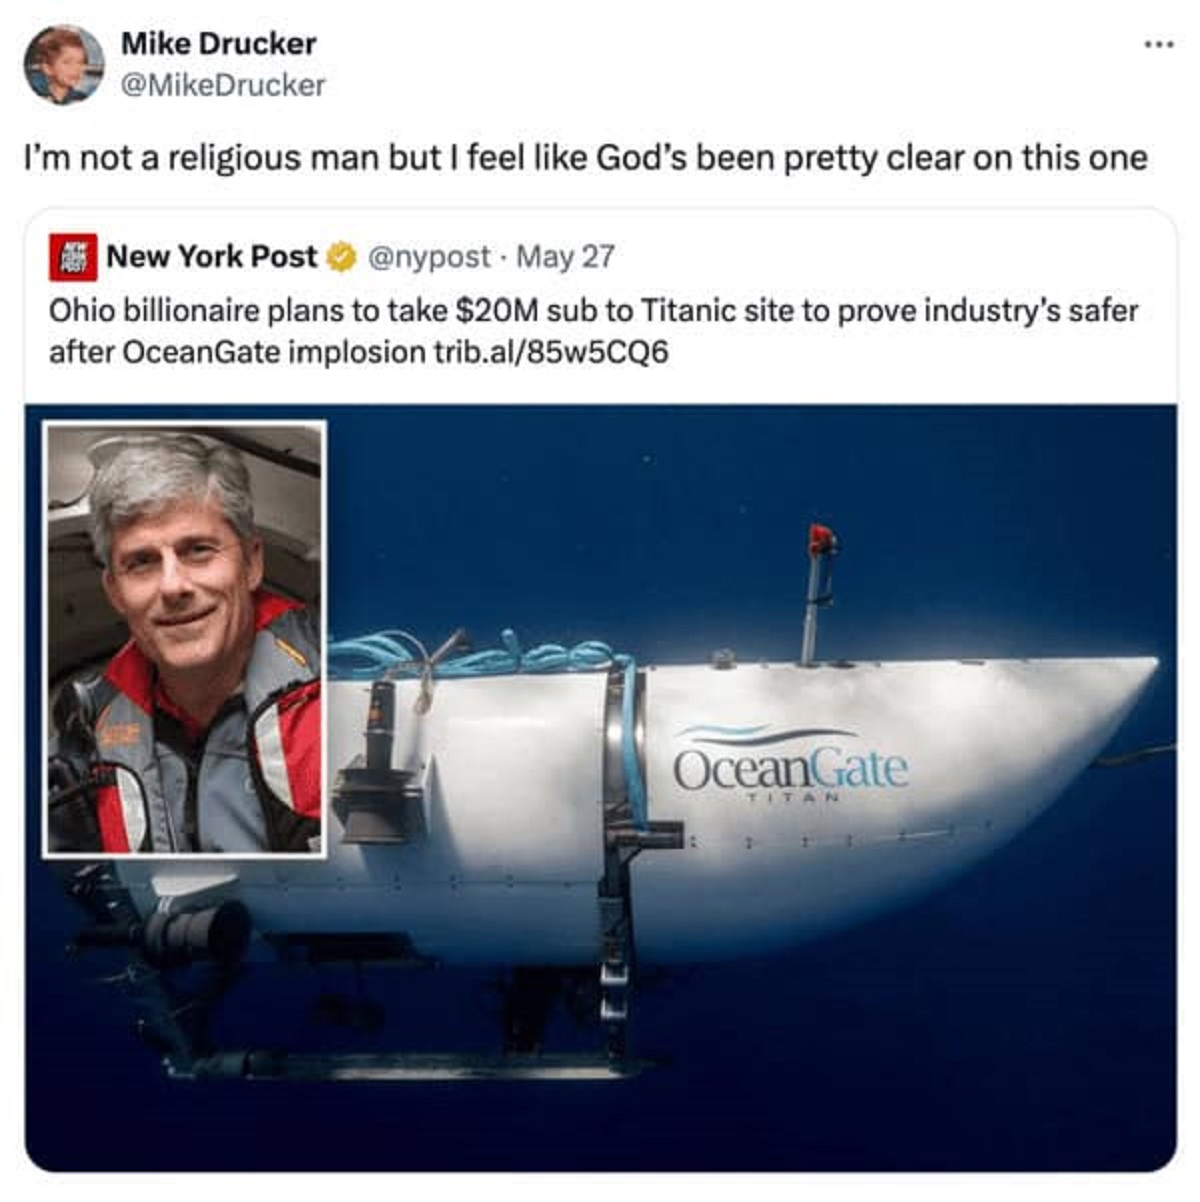 ocean gate - Mike Drucker I'm not a religious man but I feel God's been pretty clear on this one New York Post . May 27 Ohio billionaire plans to take $20M sub to Titanic site to prove industry's safer after OceanGate implosion trib.al85w5CQ6 OceanGate Ti